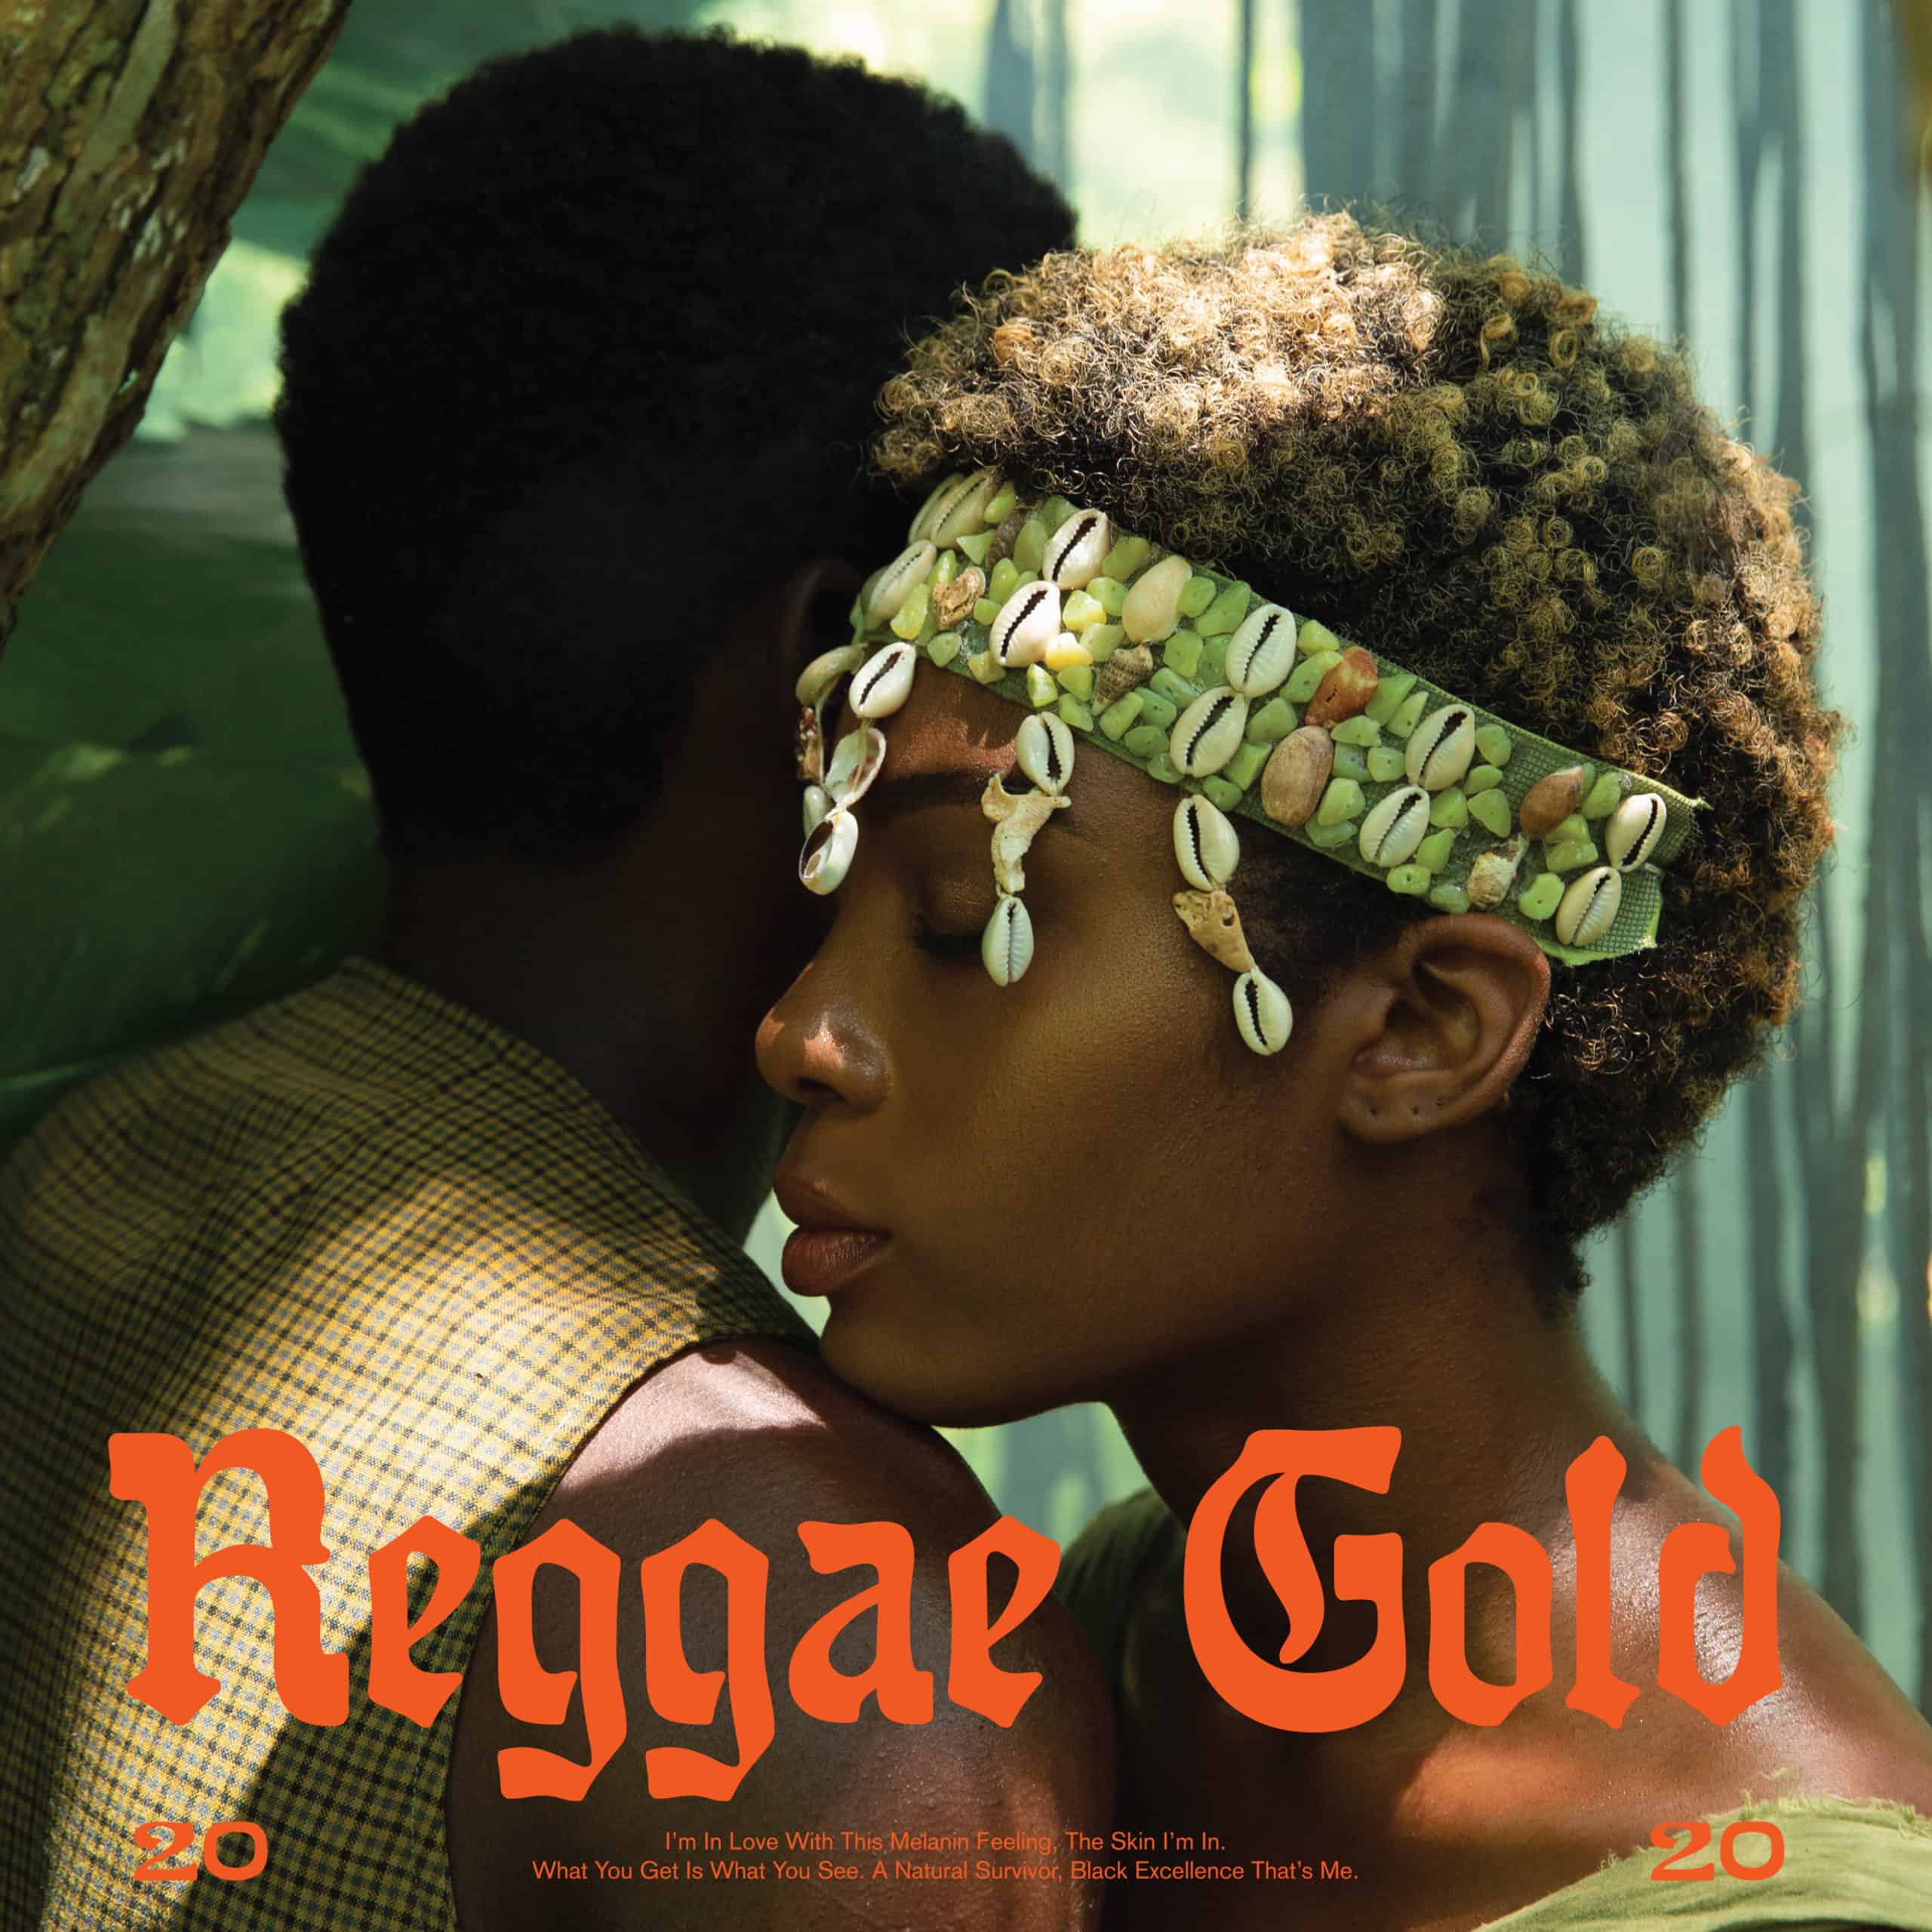 Queen Ifrica - Mih Love Yuh - Reggae Gold 2020